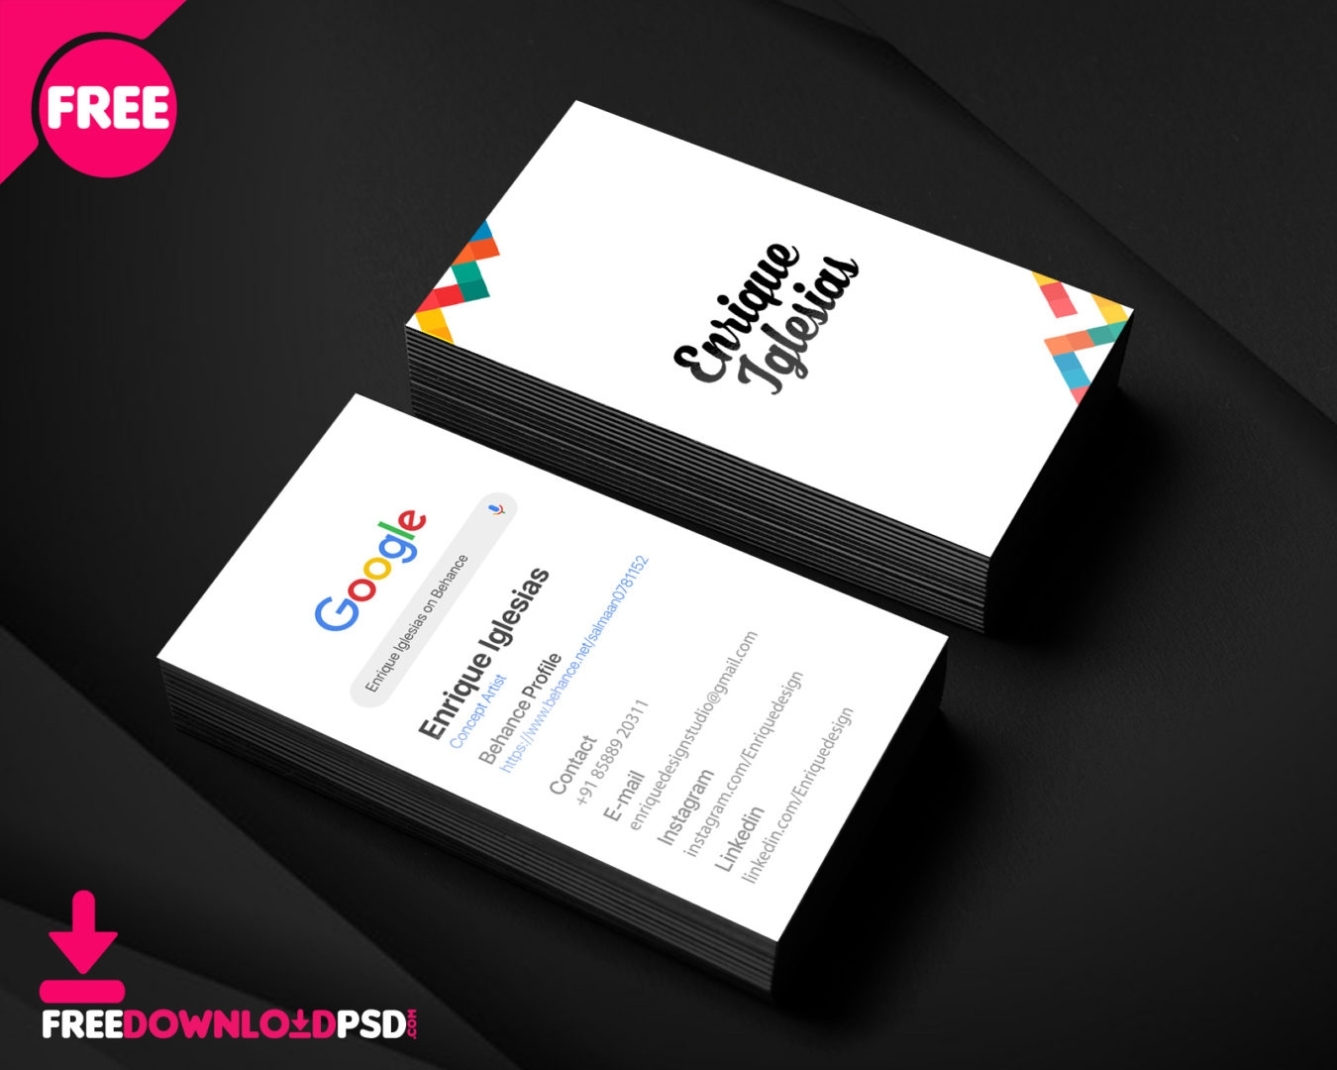 Personal Free Bussiness Card Template | Freedownloadpsd with Free Personal Business Card Templates